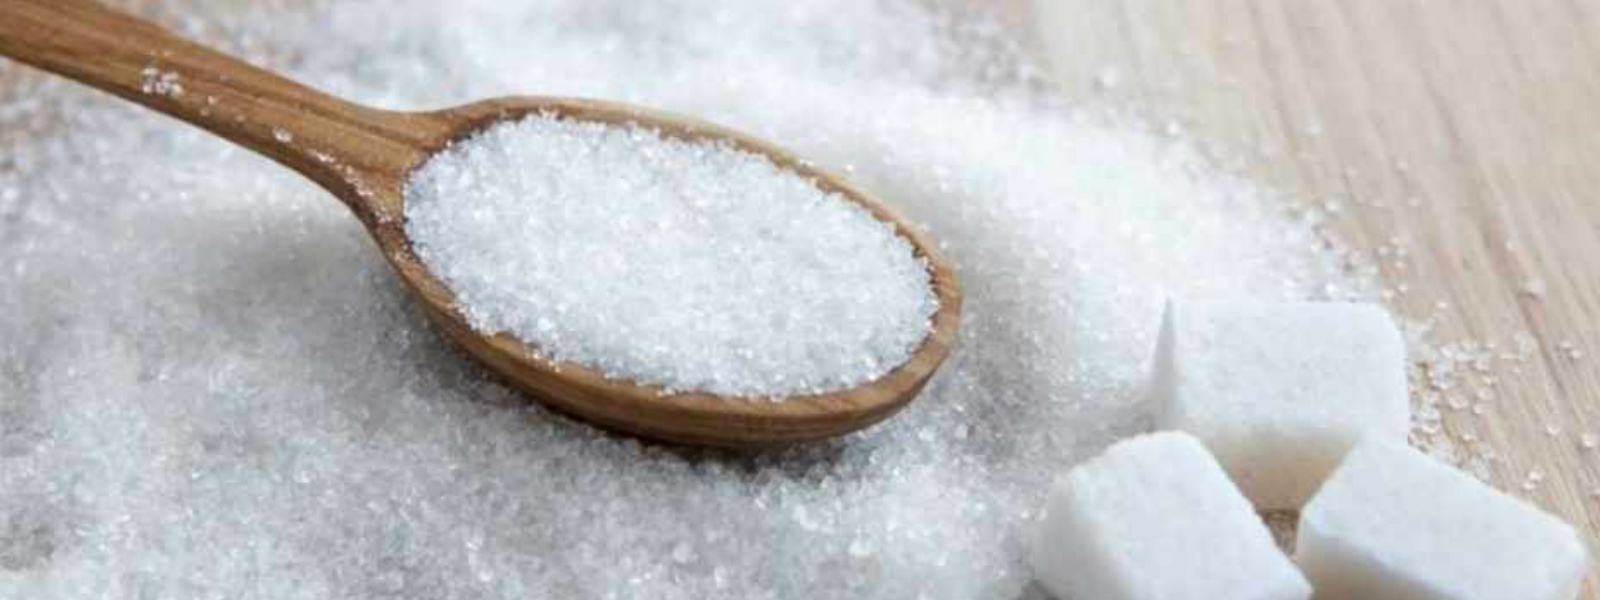 Ruling party wants Forensic Audit on Sugar Scam